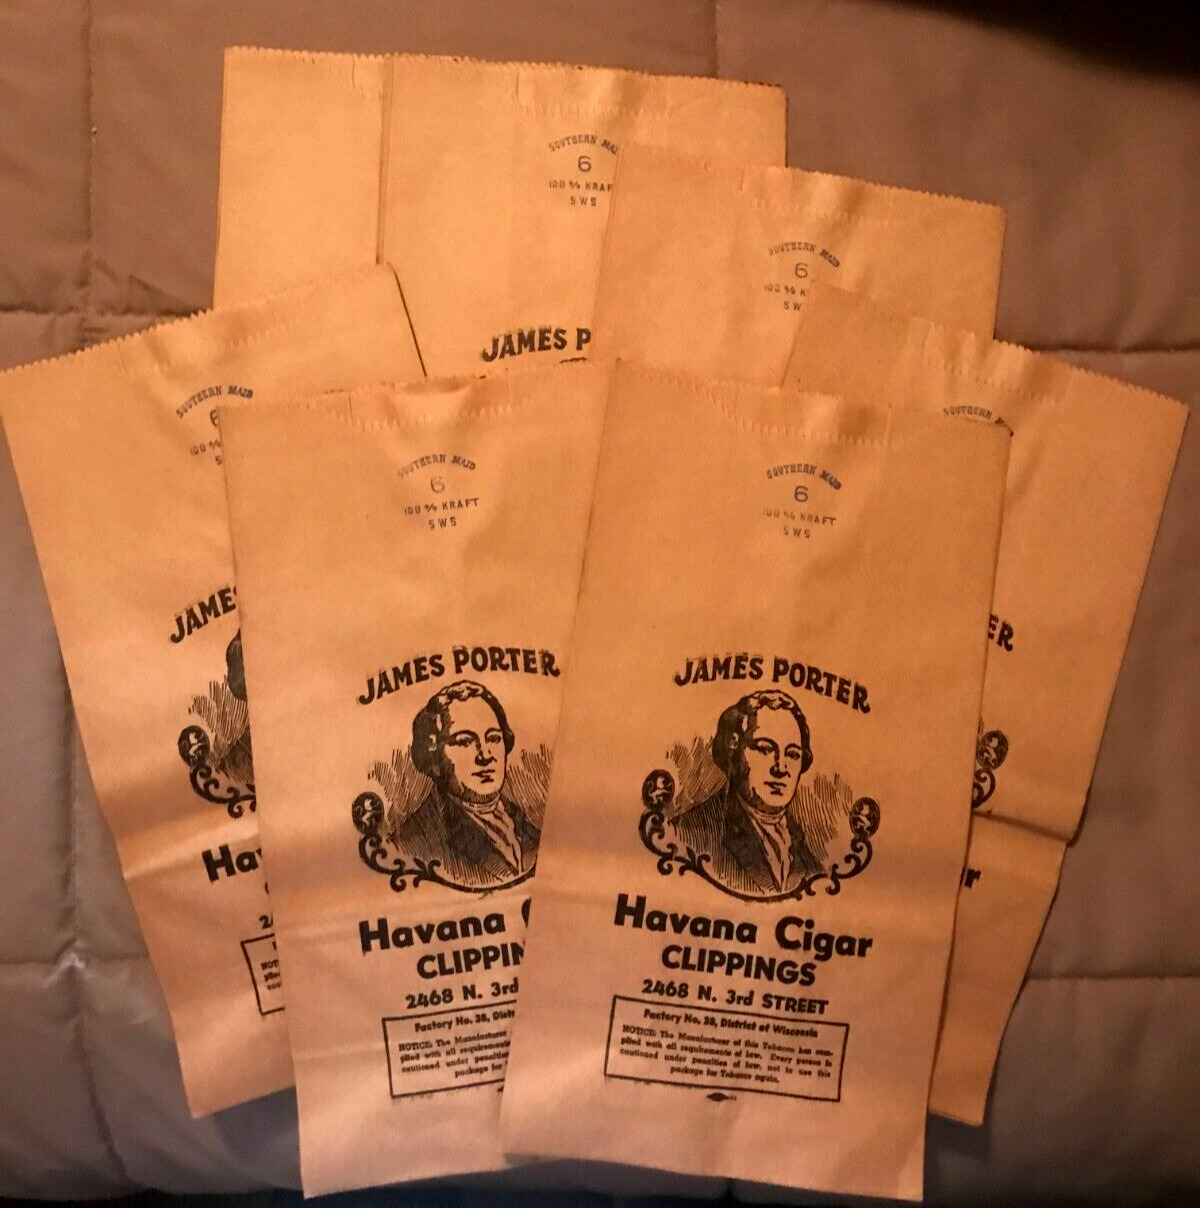 NEW- LOT OF 11+ 2 Havana Cigar Tobacco Clippings Empty Paper Bags JAMES PORTER